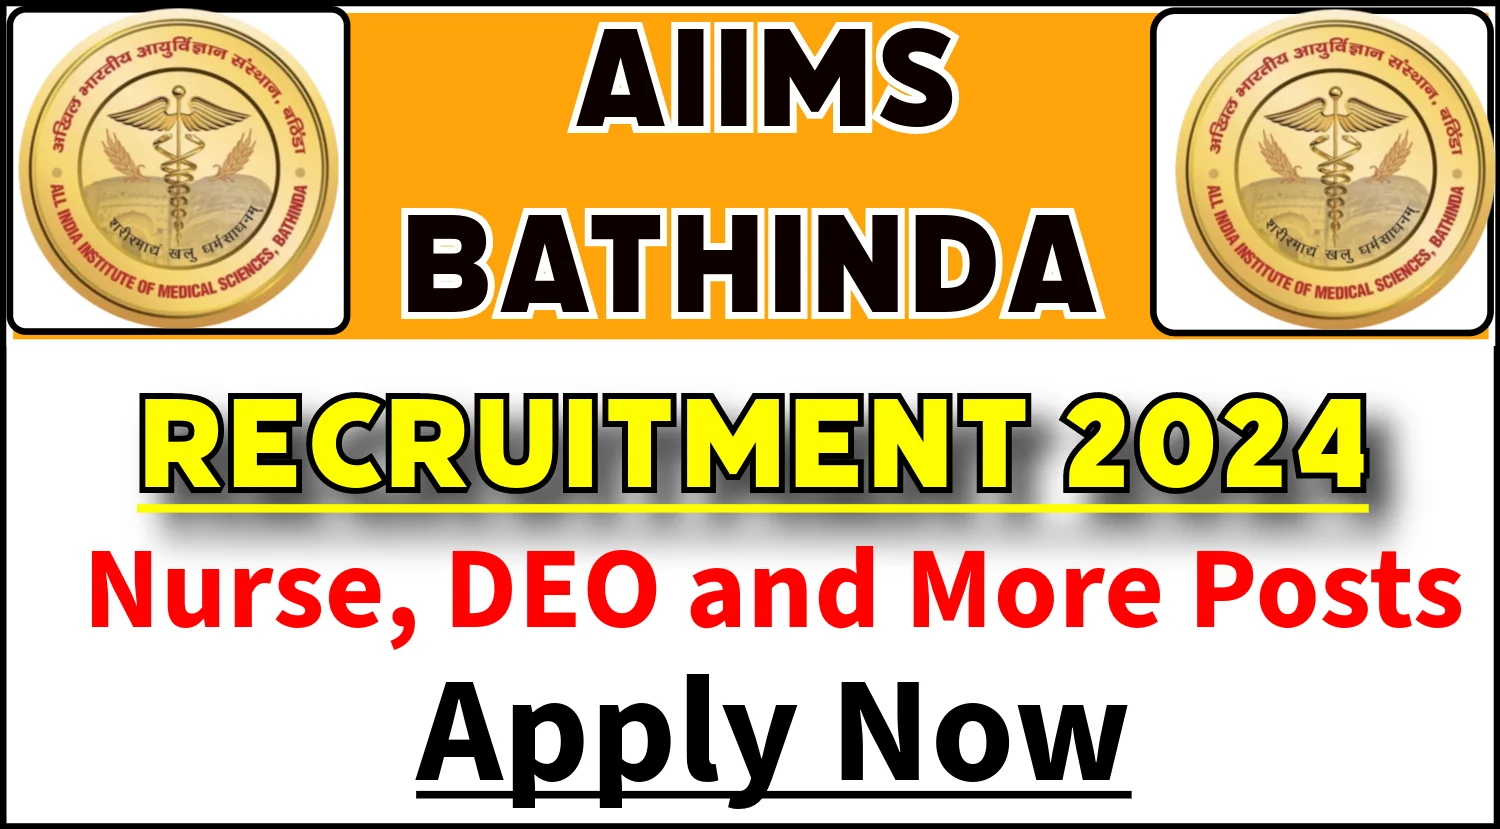 AIIMS Bathinda Recruitment 2024for Nurse DEO and More Posts